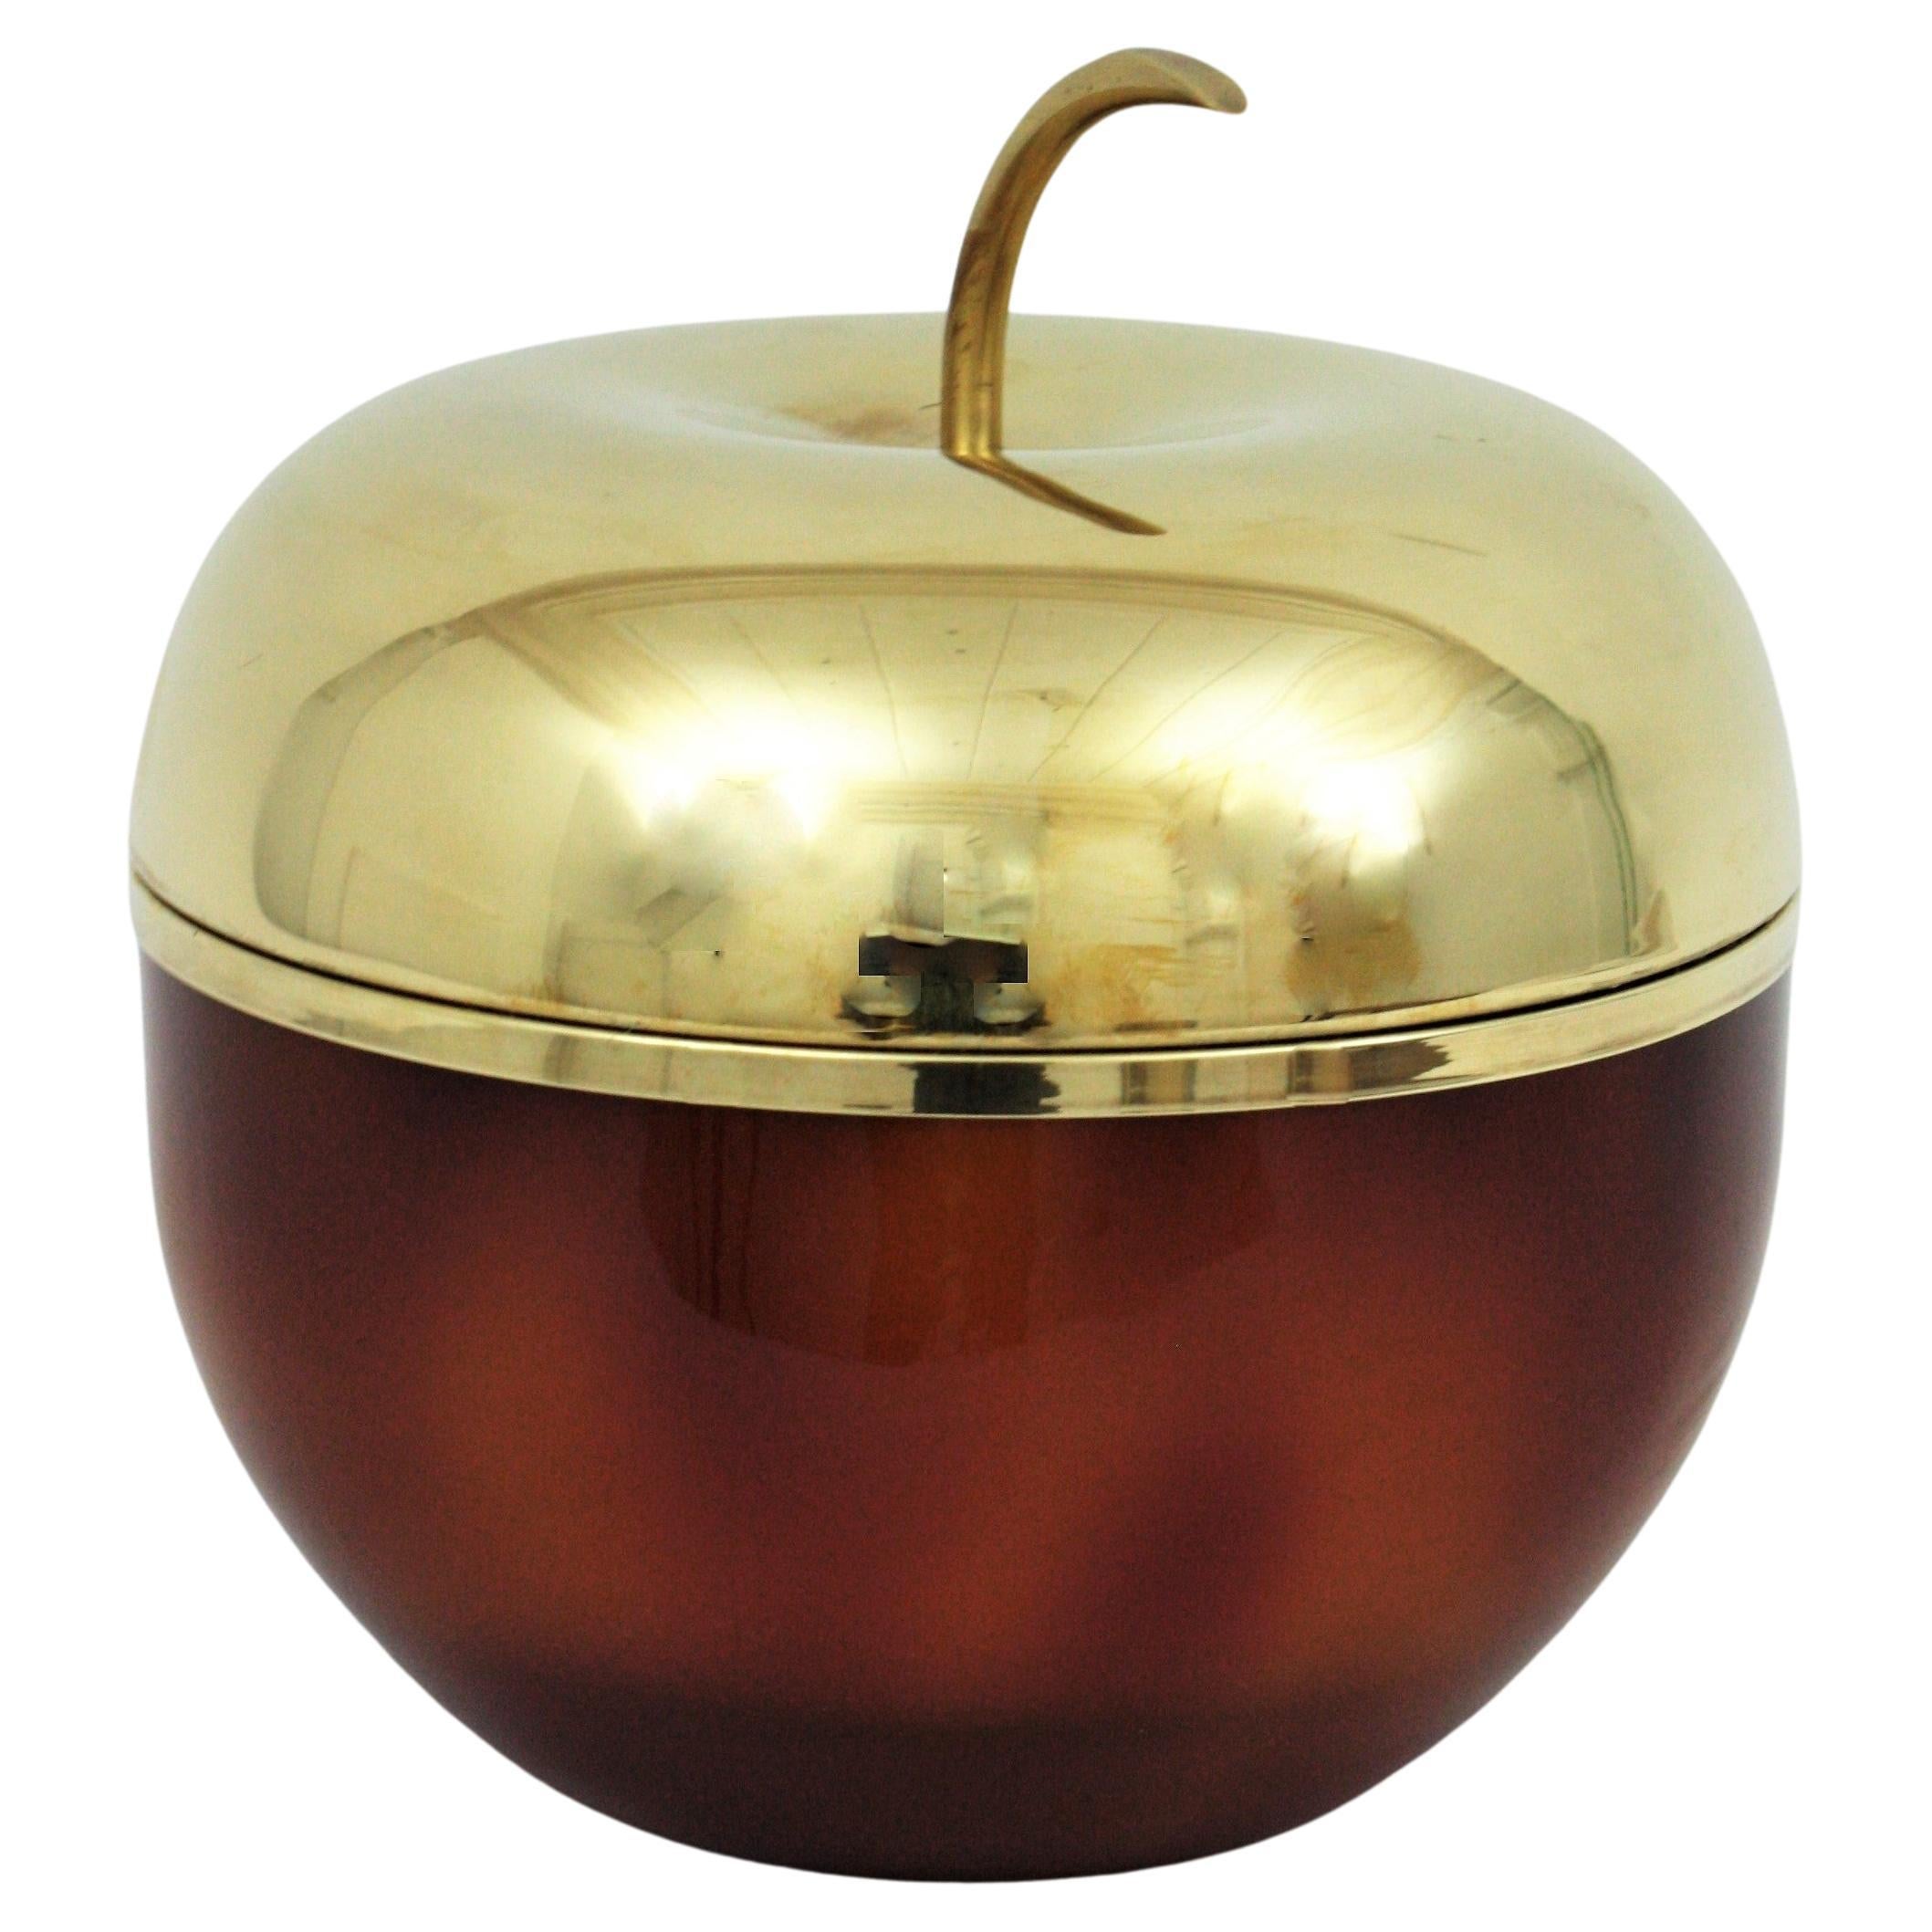 Apple Ice bucket, brass, Lucite, Spain, 1960s
A highly decorative faux tortoiseshell, metal plated and aluminum ice bucket or wine cooler in the manner of Mauro Manetti.
Use it in a dry bar, on a cocktails trolley or on a Martini Table. It will be